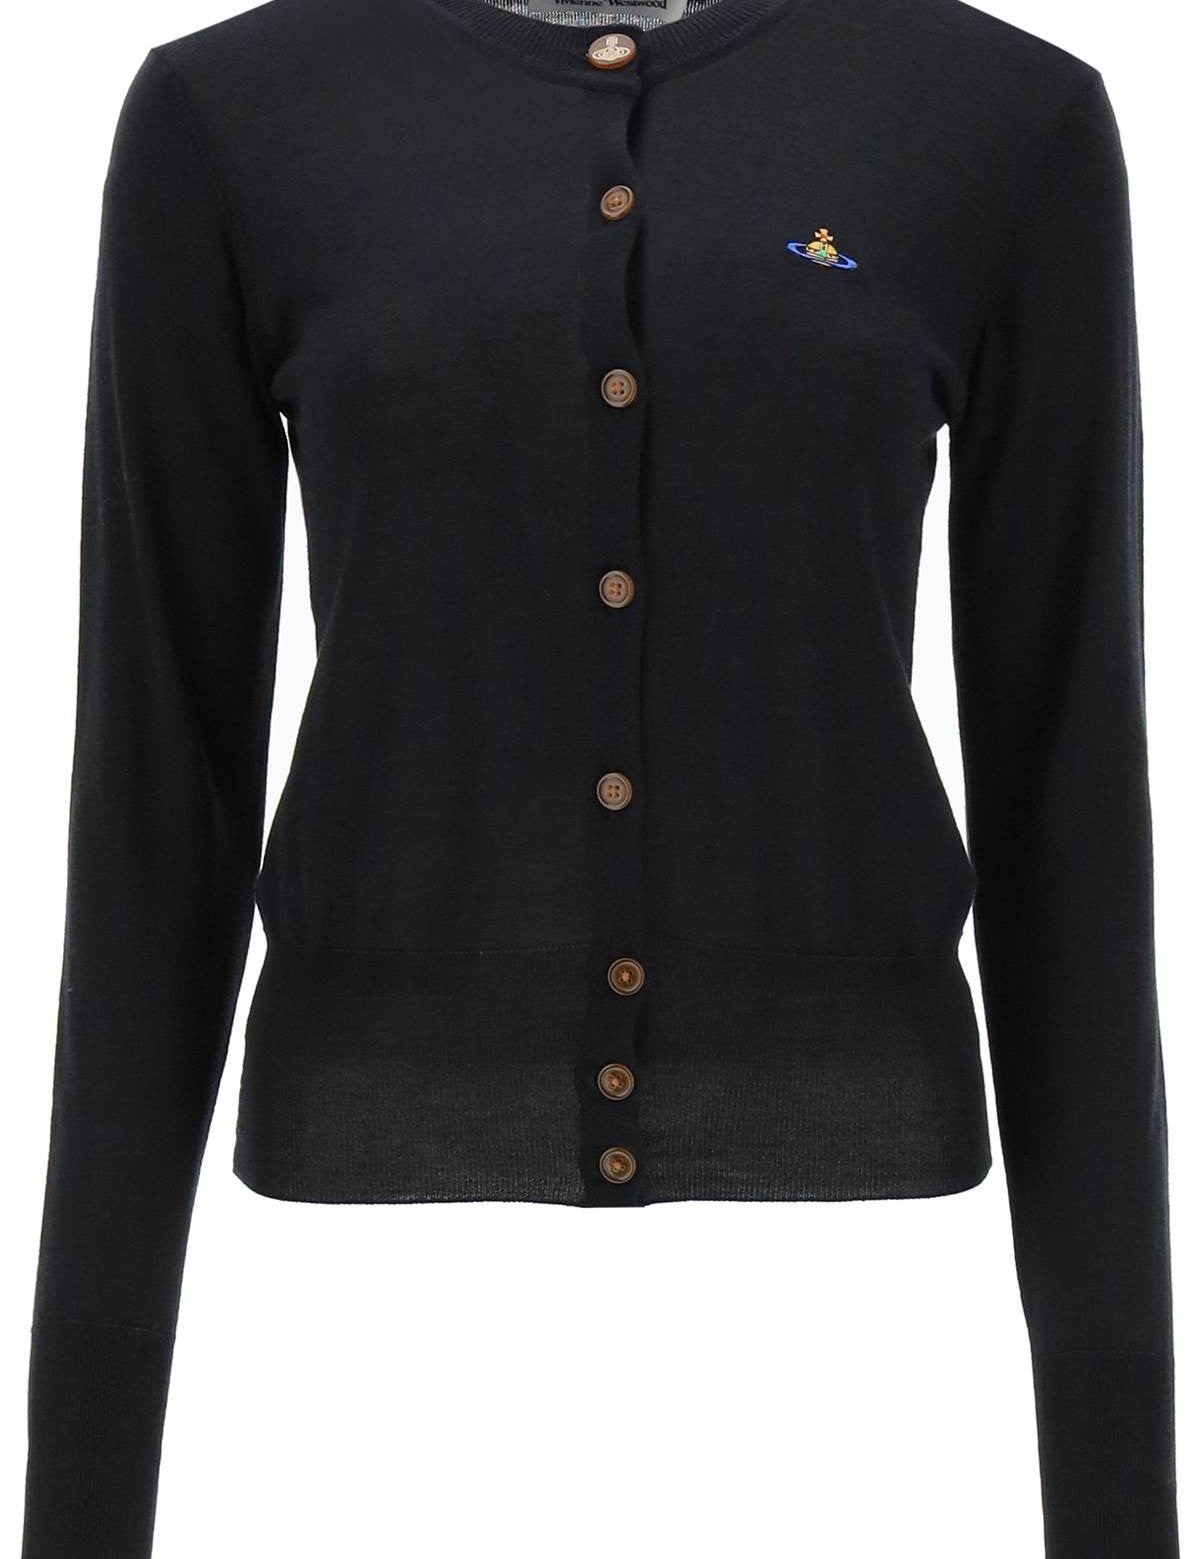 vivienne-westwood-bea-cardigan-with-embroidered-logo.jpg